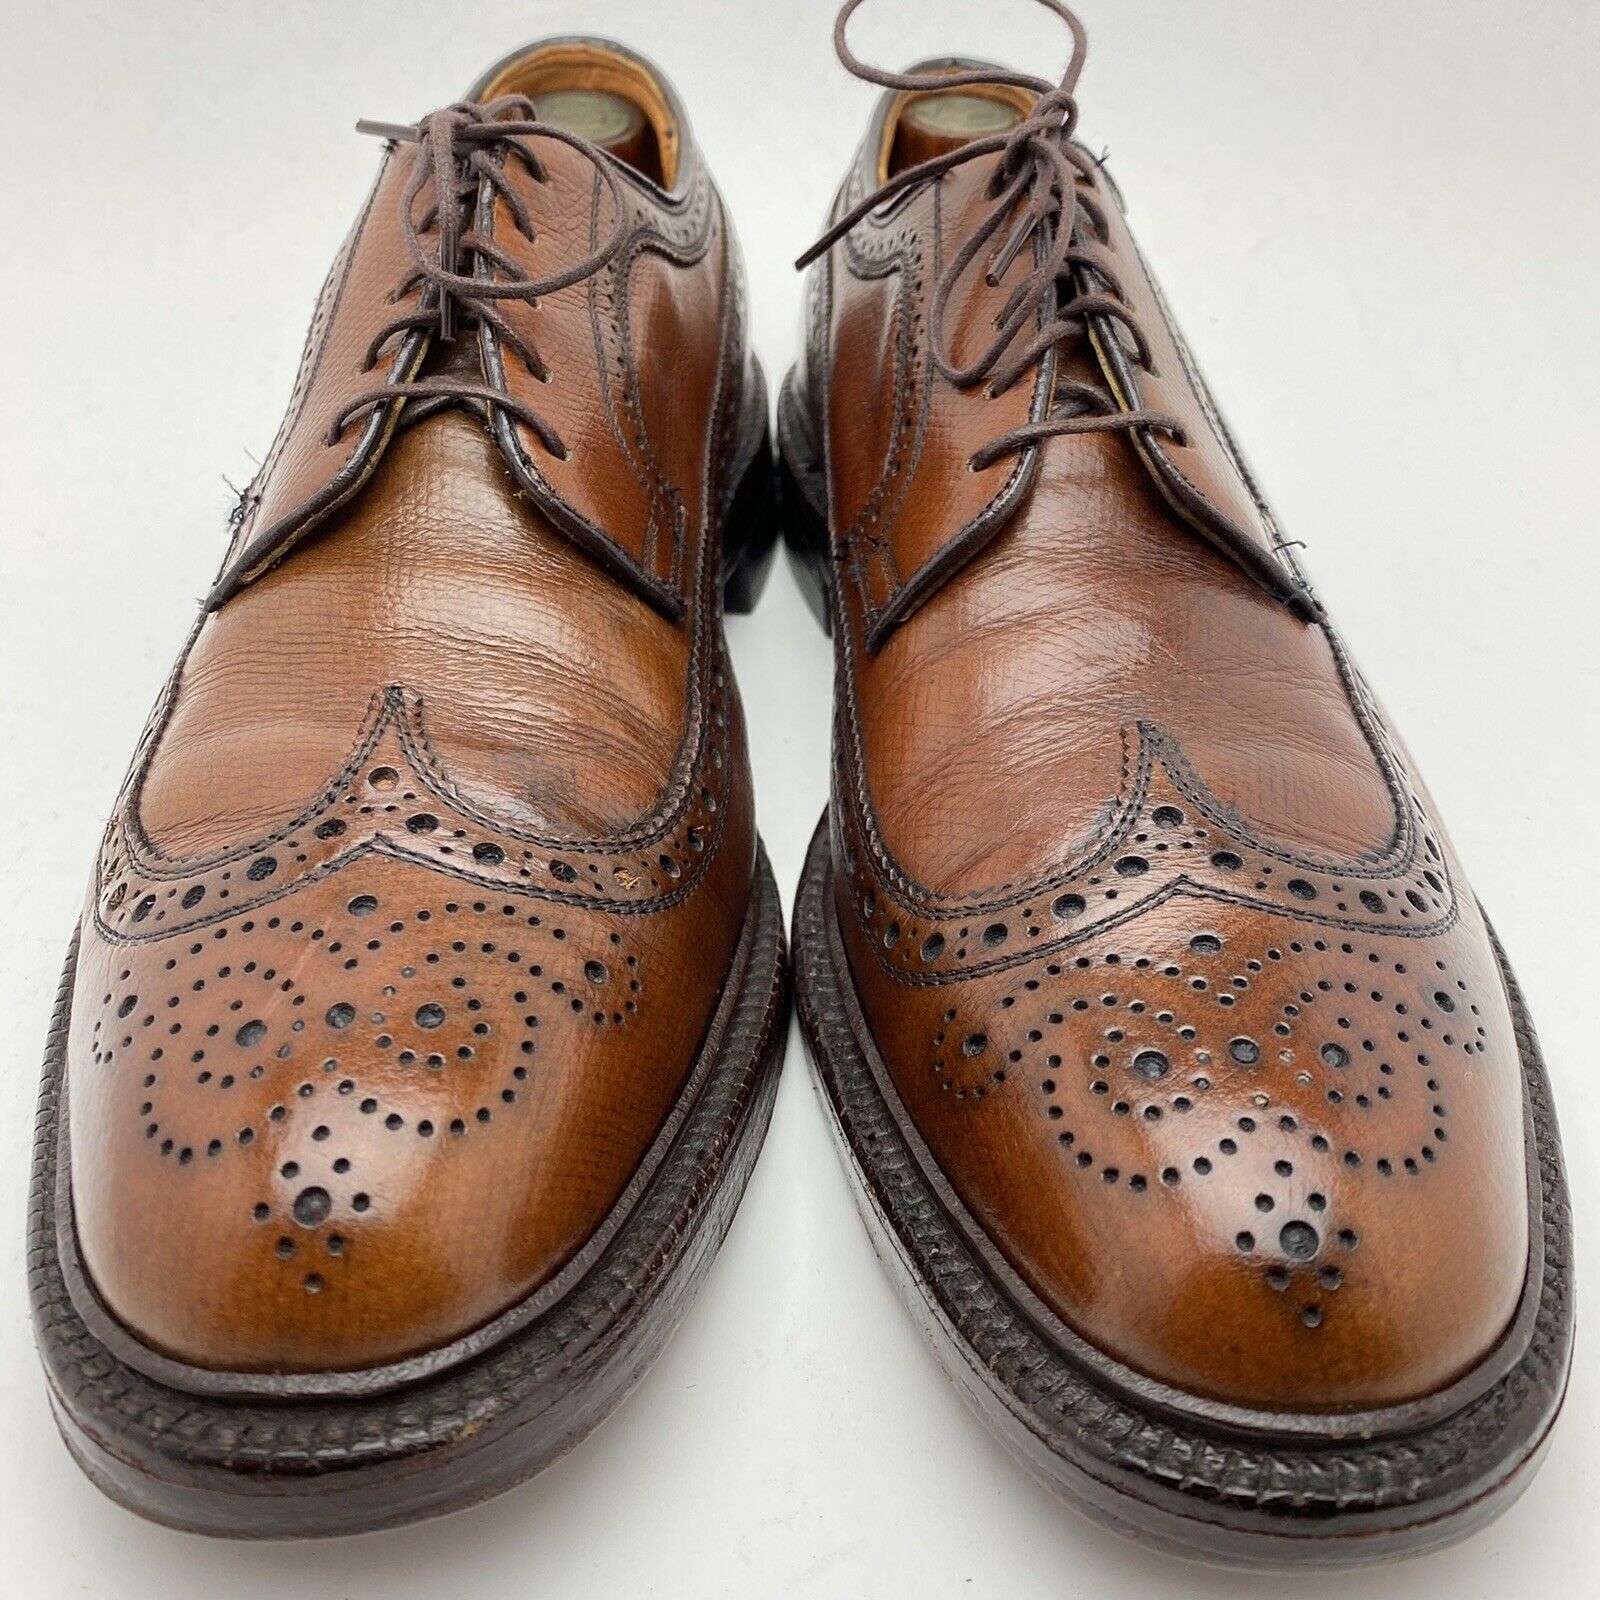 VTG Bob Smart Shoes For Young Men Cognac Pebbled Leather Longwing Oxford US 10 A